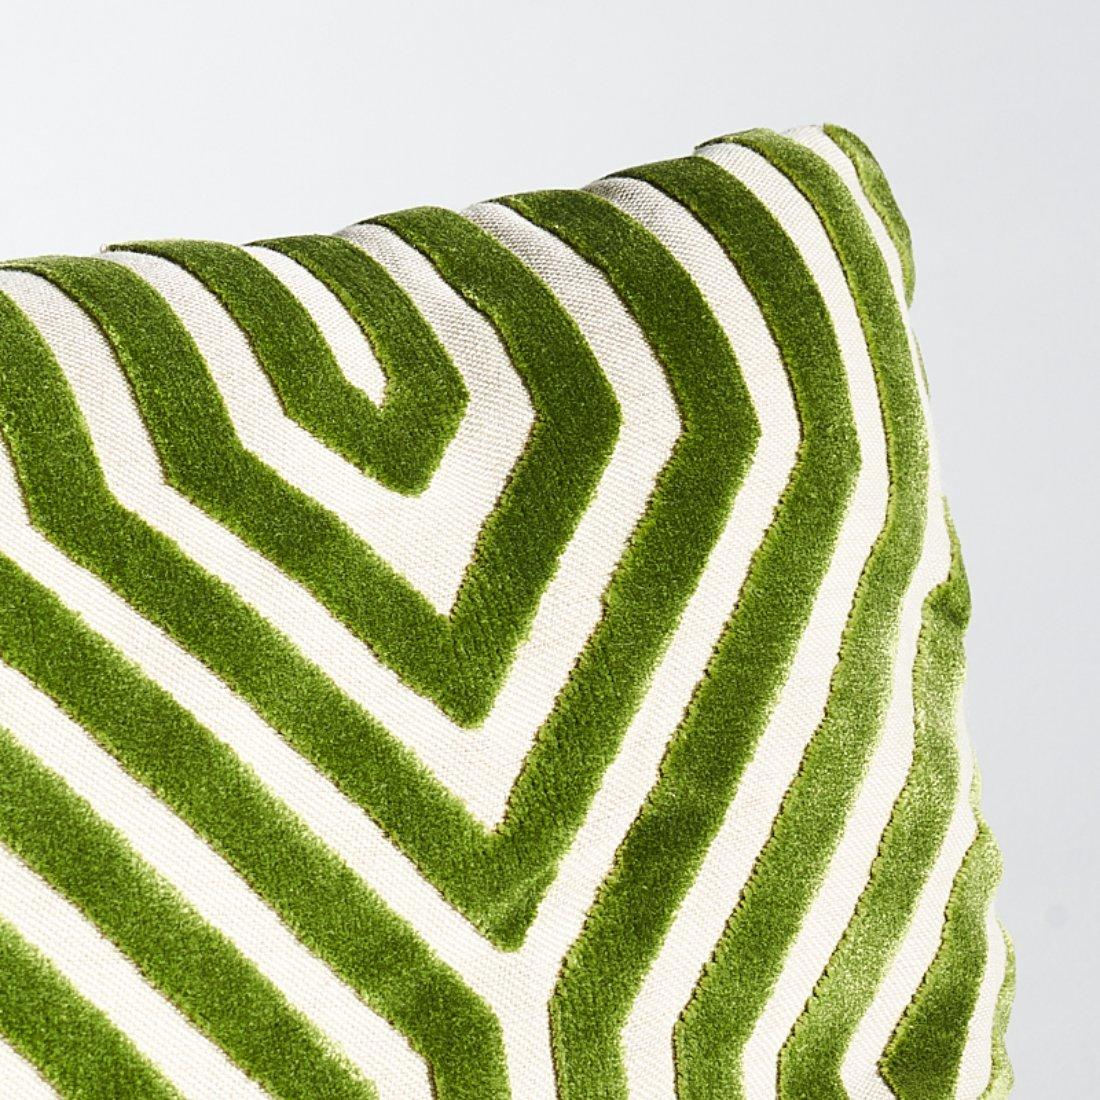 This pillow features Vanderbilt Velvet by Mary McDonald for Schumacher with a Knife Edge finish. A large-scale, linear design gives this Italian cut velvet fabric a graphic sensibility, while the silk-like pile adds extra dimension and a luxurious